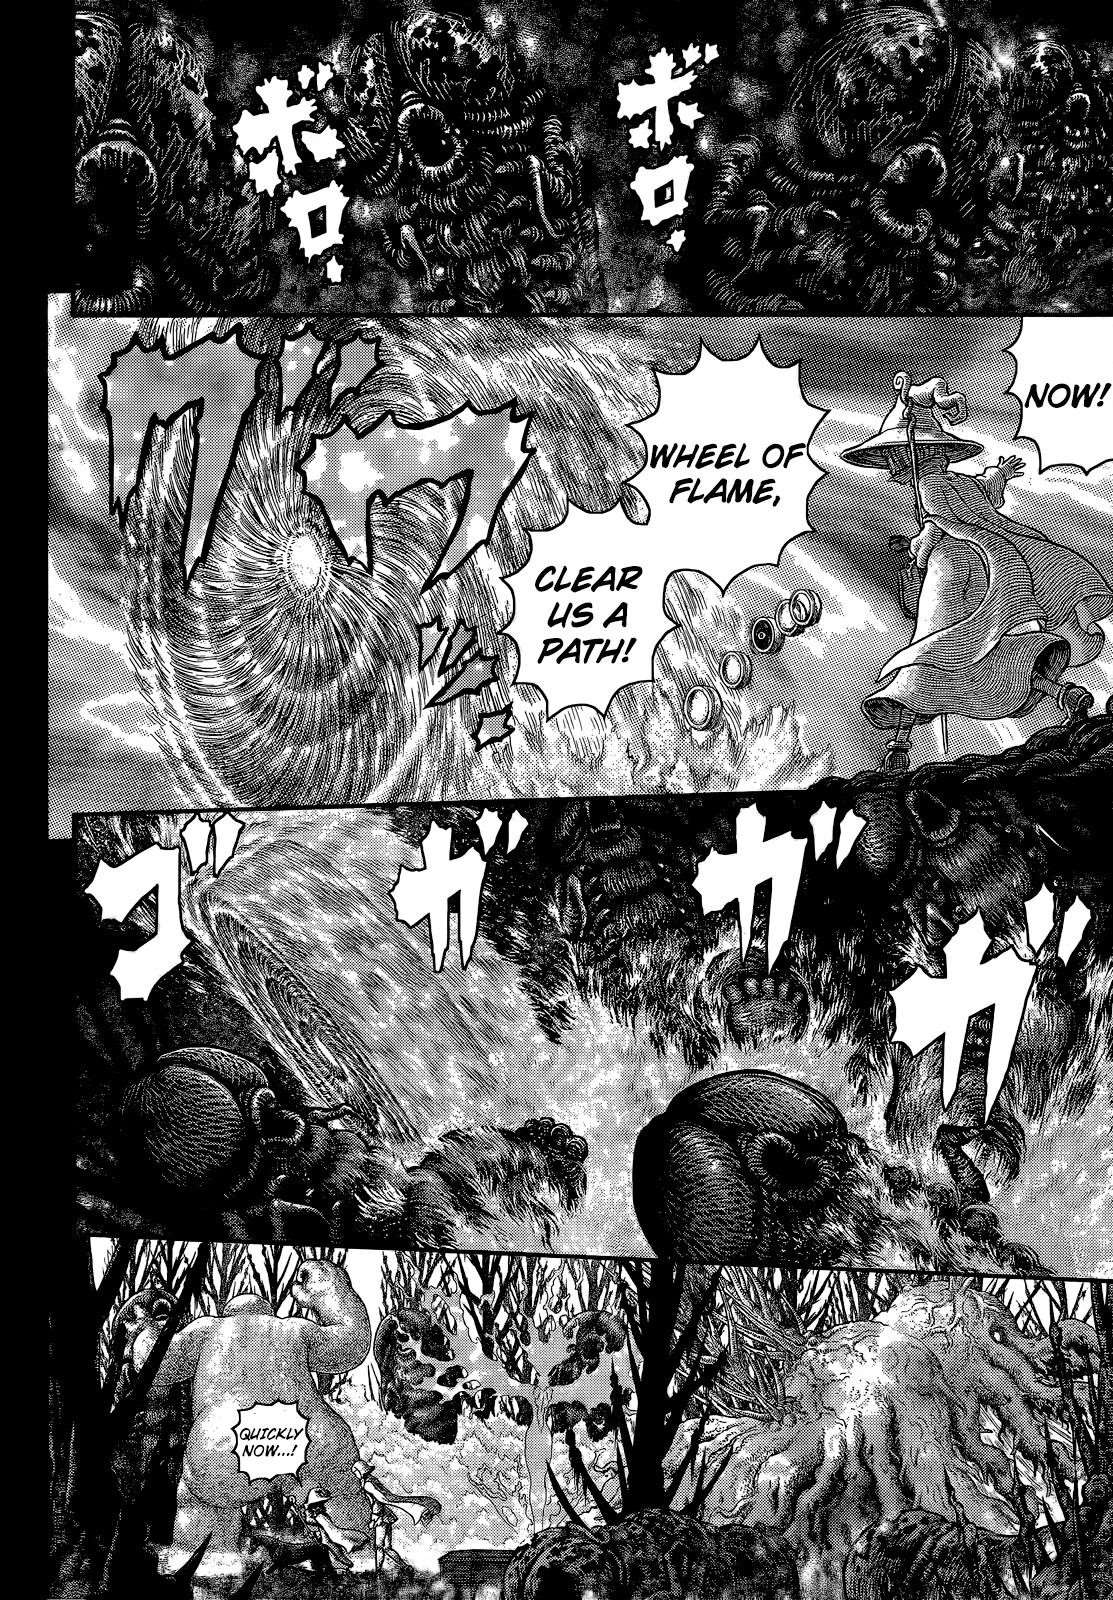 Tachiyomi 1904 Berserk Chapter 372 Mark as read View chapters Download -  iFunny Brazil